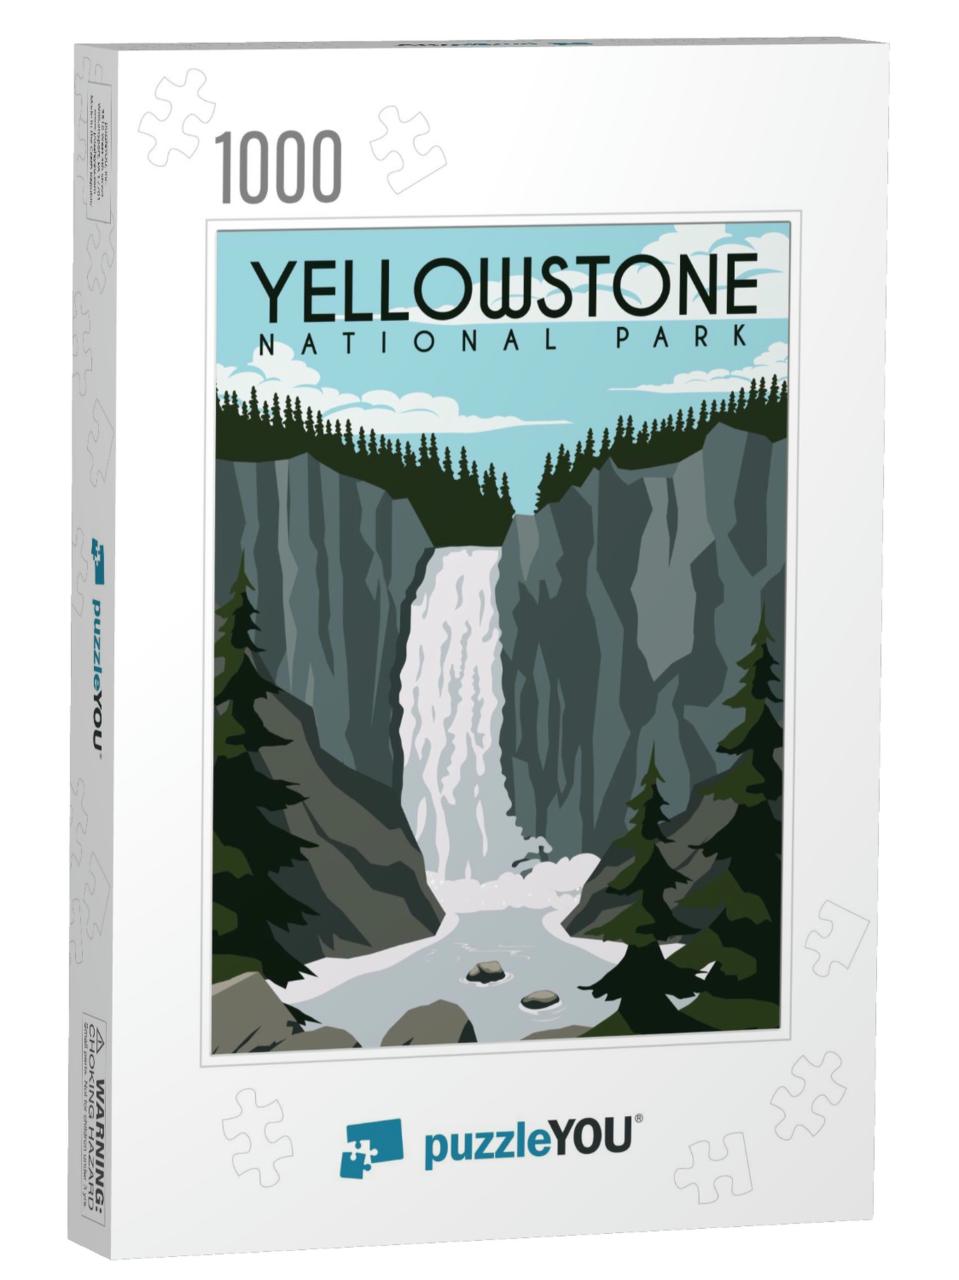 Yellowstone Vector Illustration Background. Travel to Yel... Jigsaw Puzzle with 1000 pieces